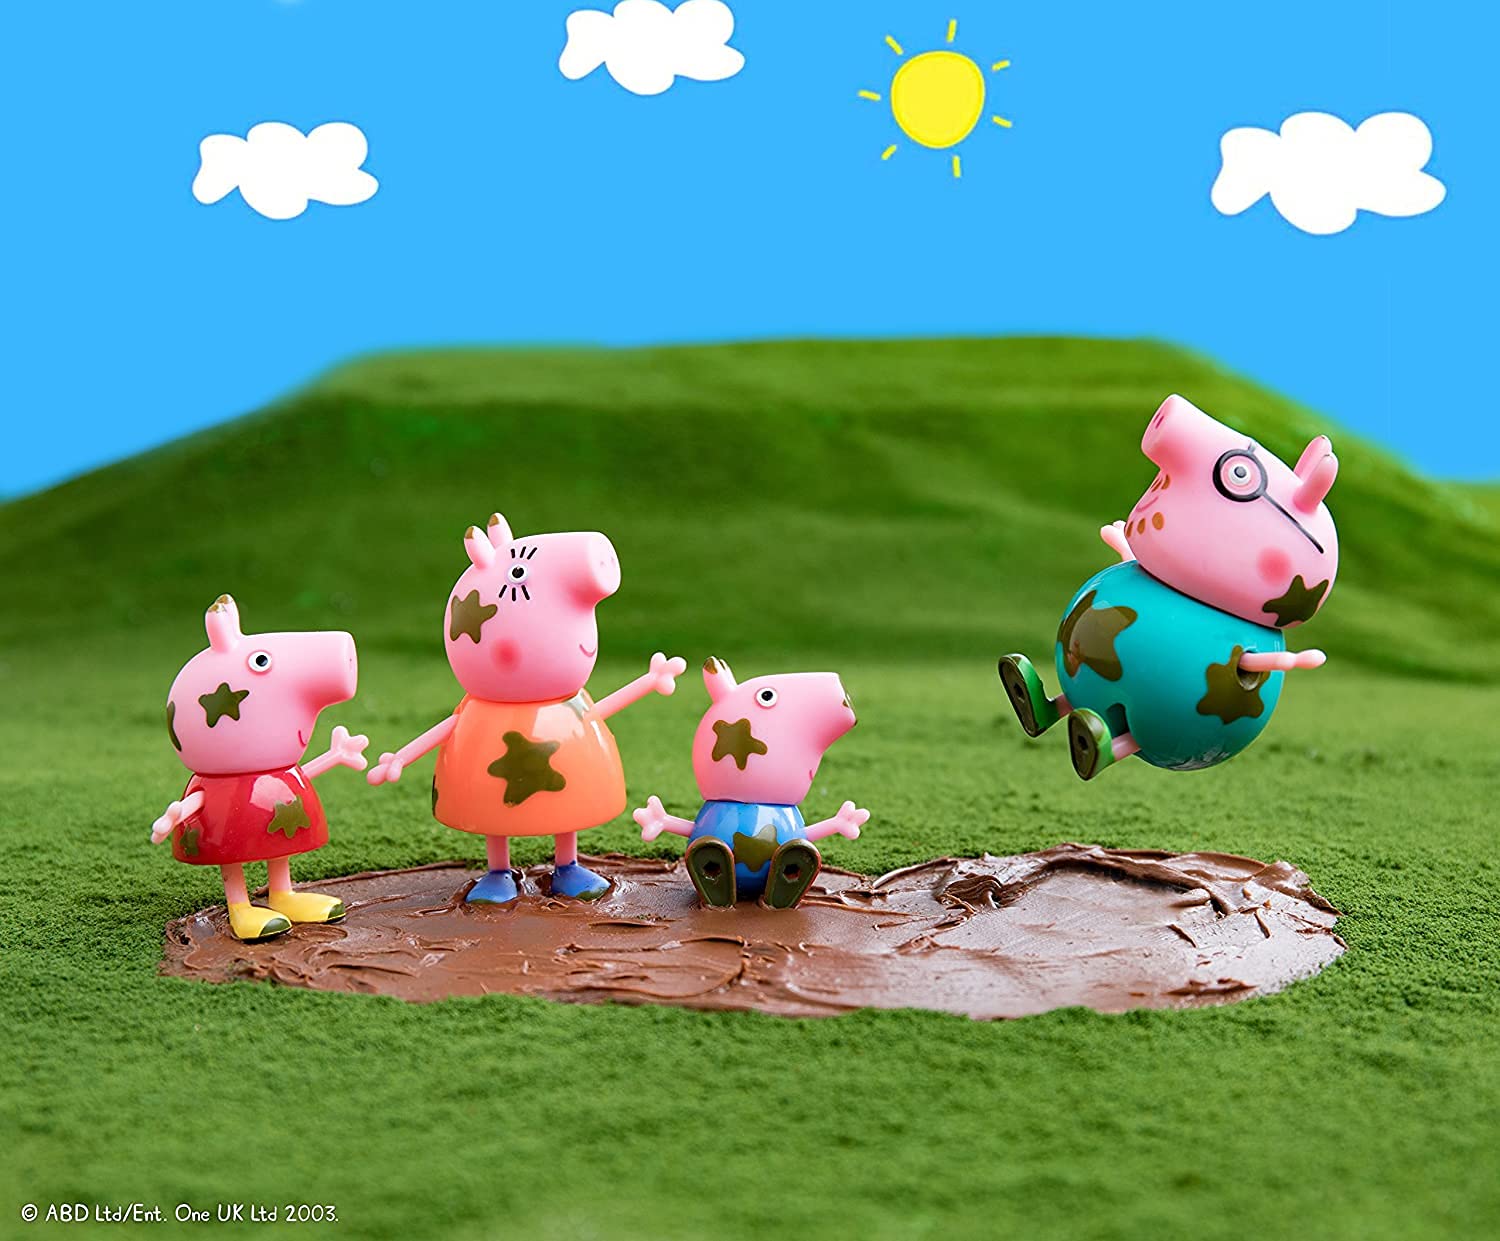 Peppa Pig Muddy Puddles Family 4-Figure Pack - Includes Peppa, George, Mummy & Daddy Pig - Toy Gift for Kids - Ages 3+